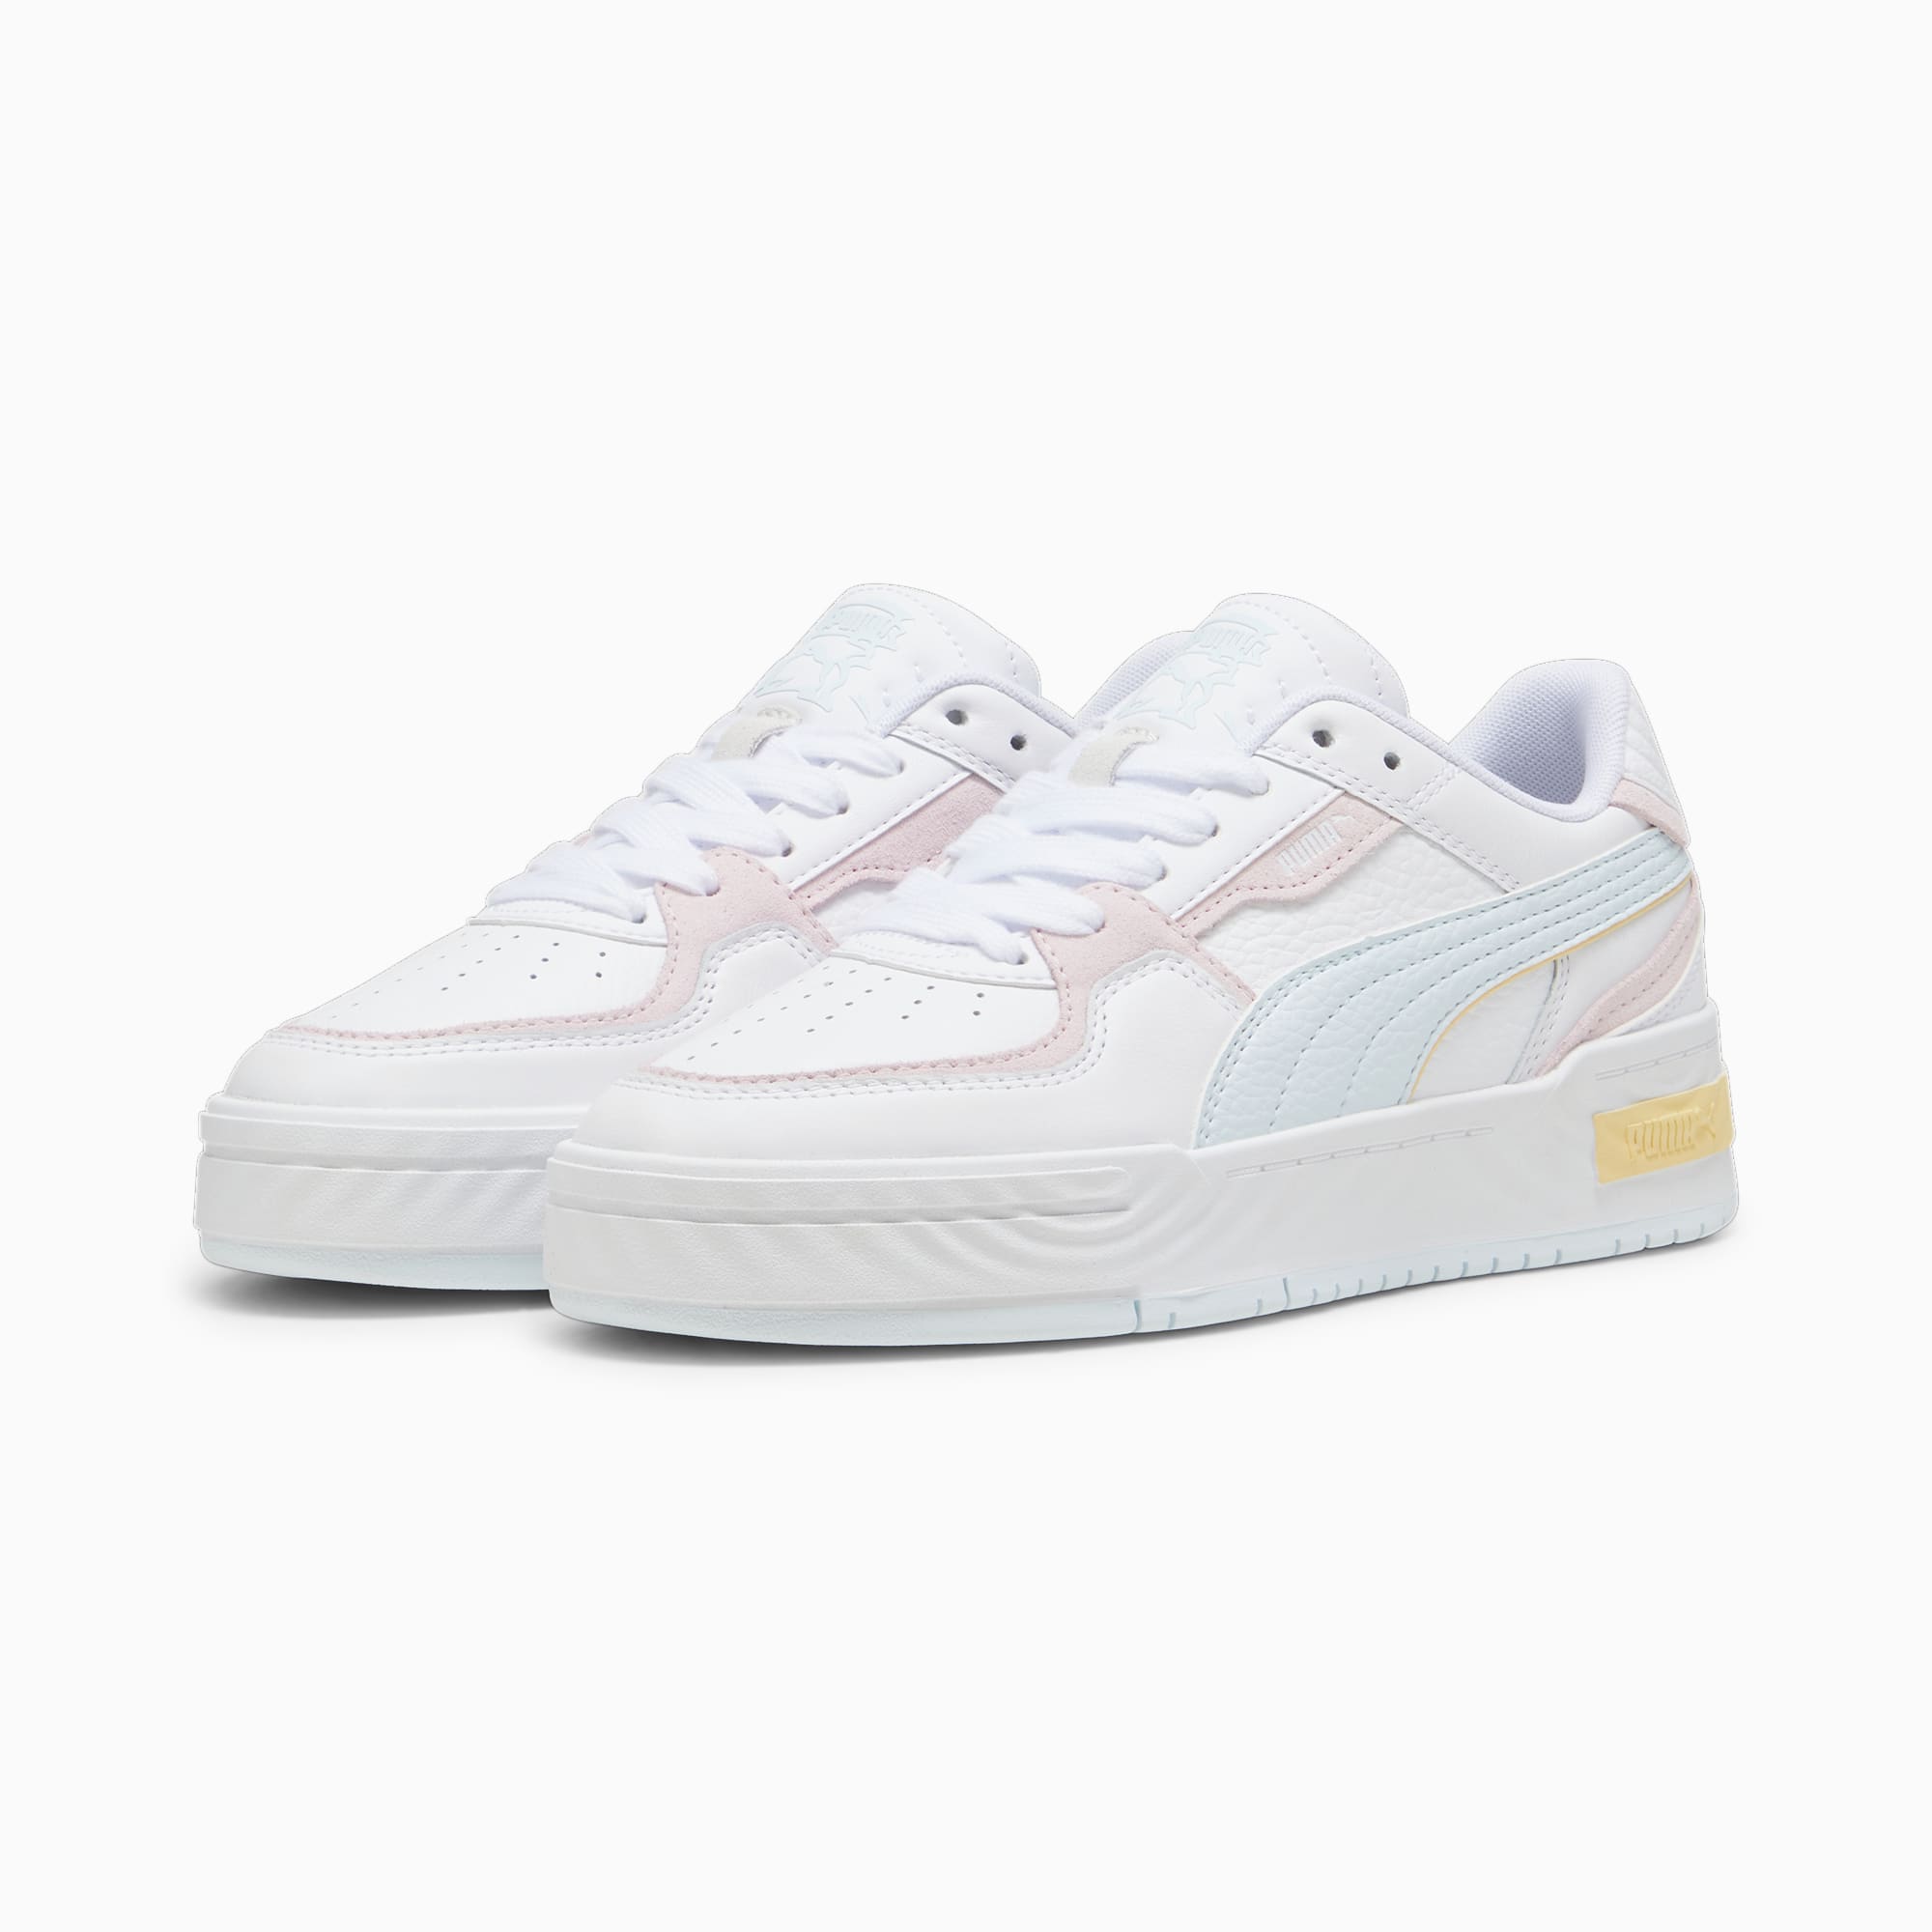 Women's PUMA Ca Pro Ripple Earth Sneakers, White/Whisp Of Pink/Dewdrop